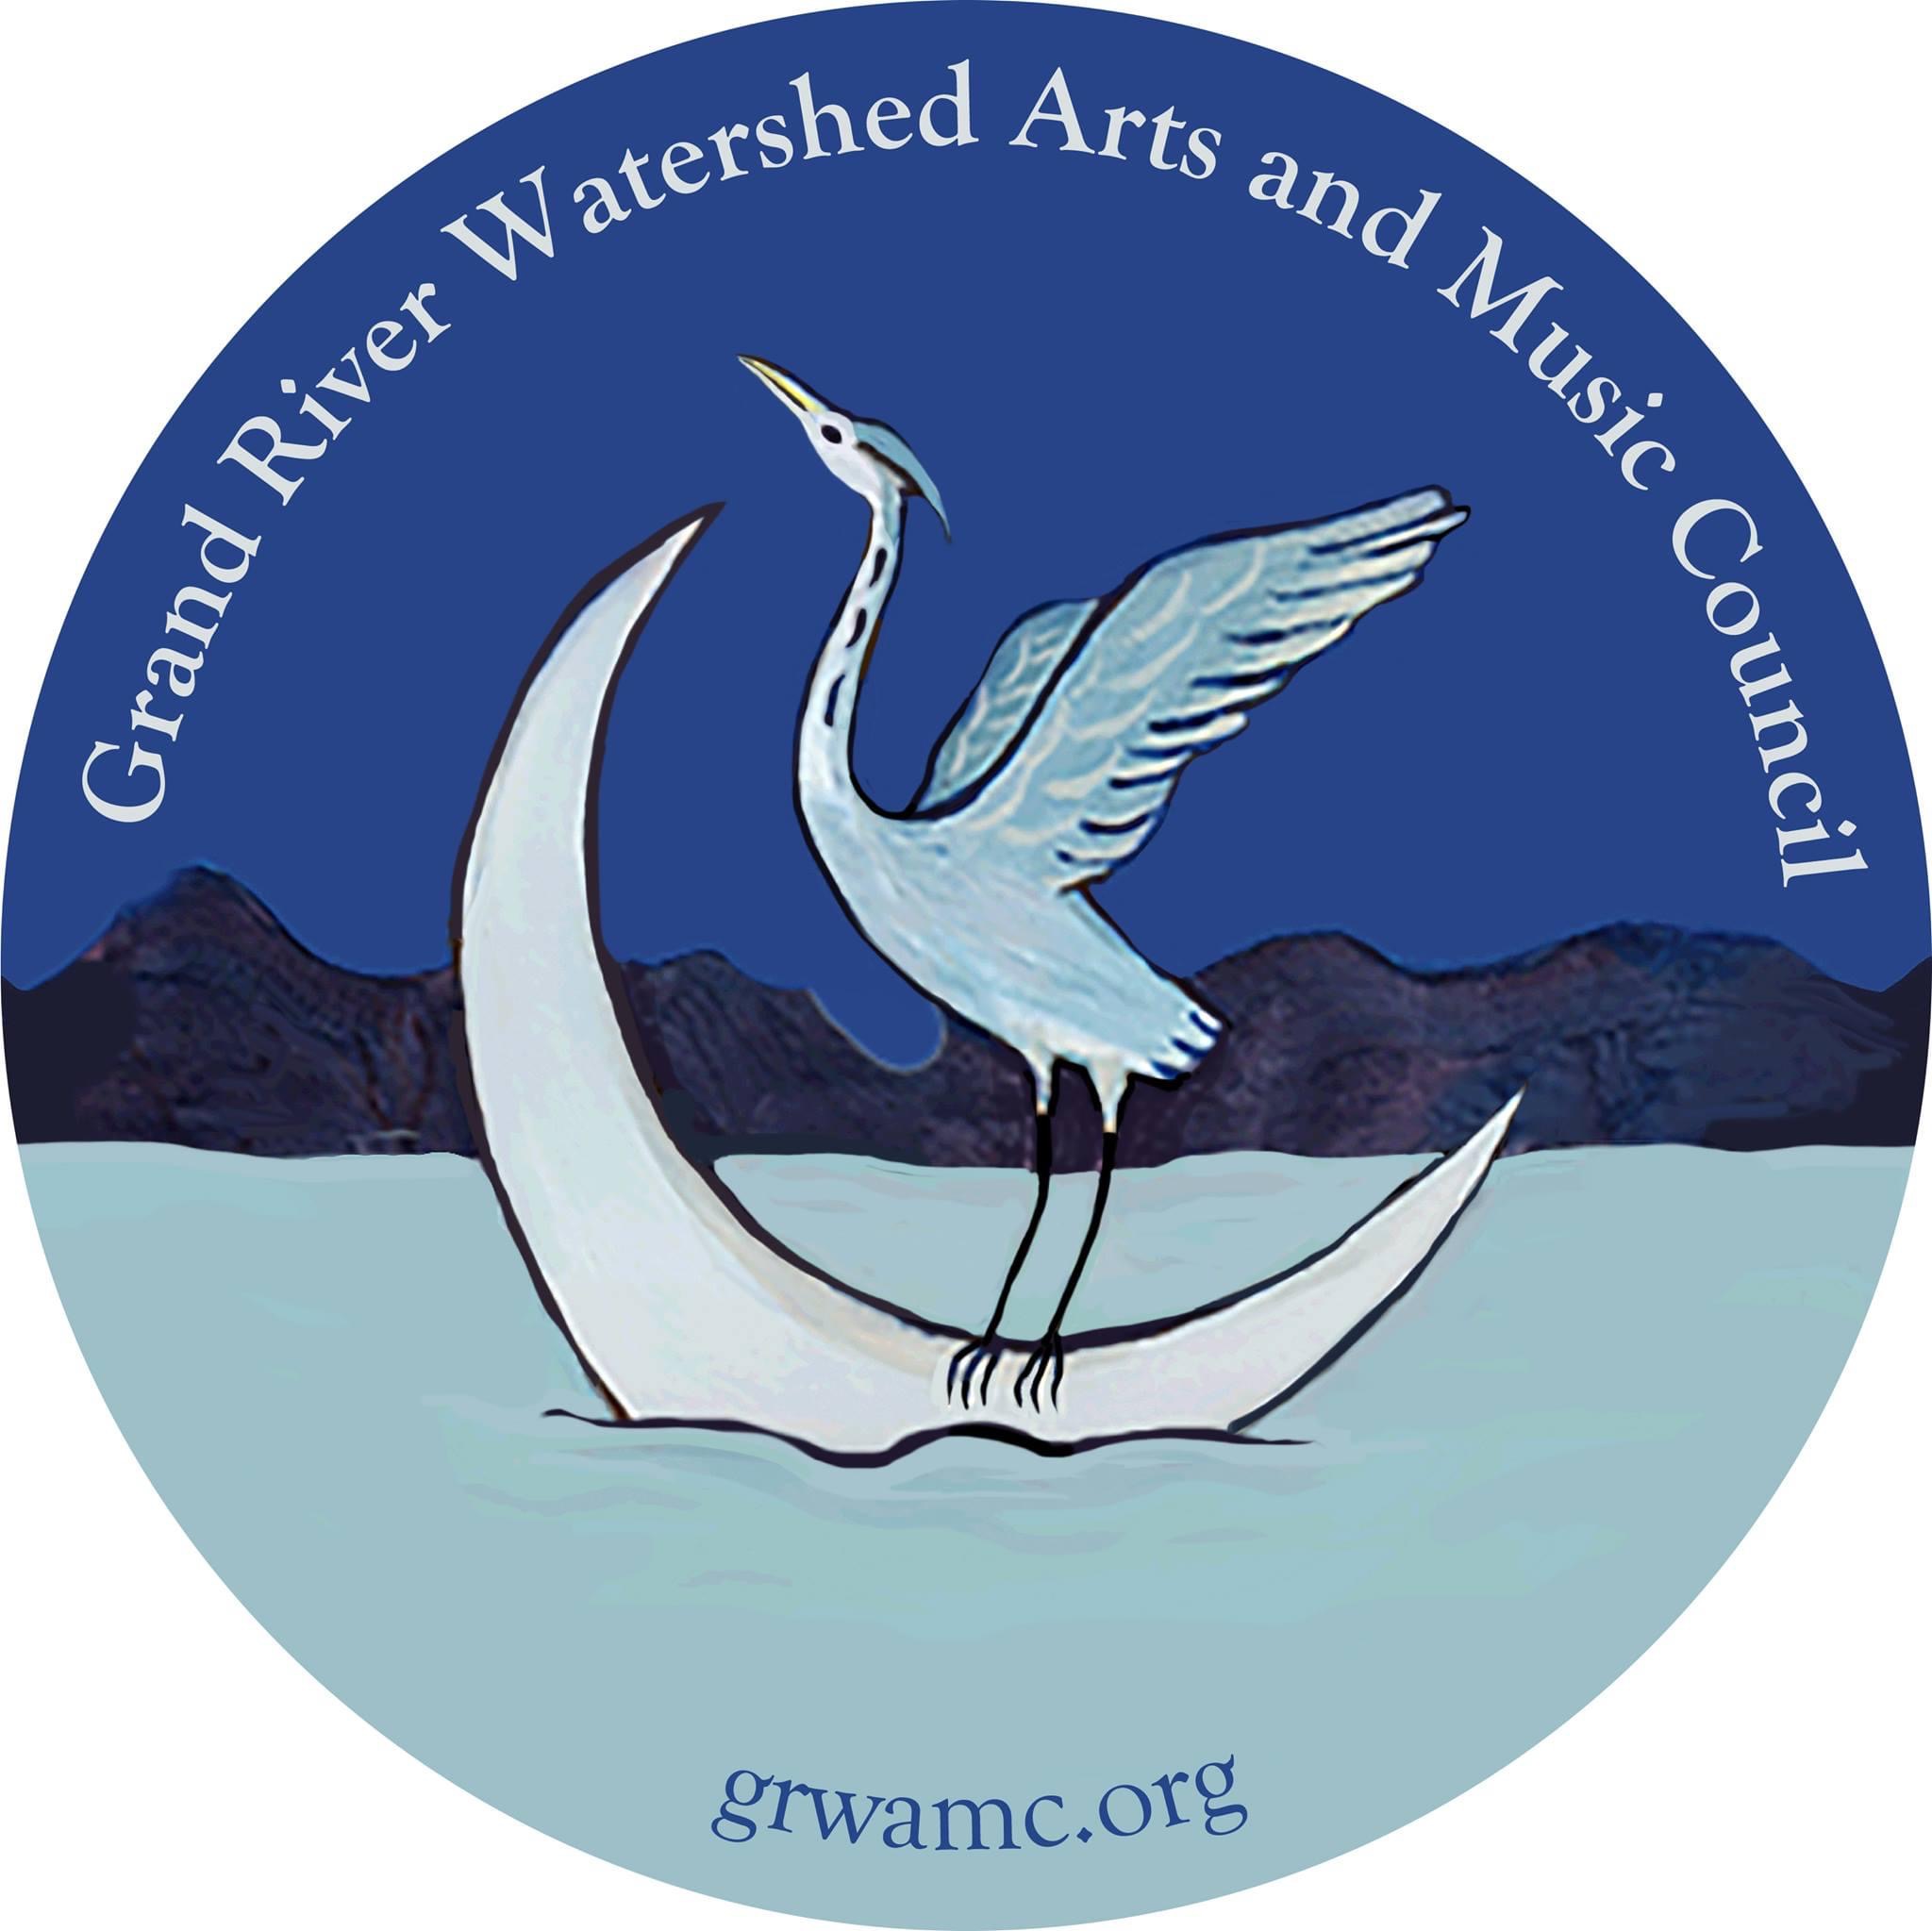 Grand River Watershed Arts and Music Council